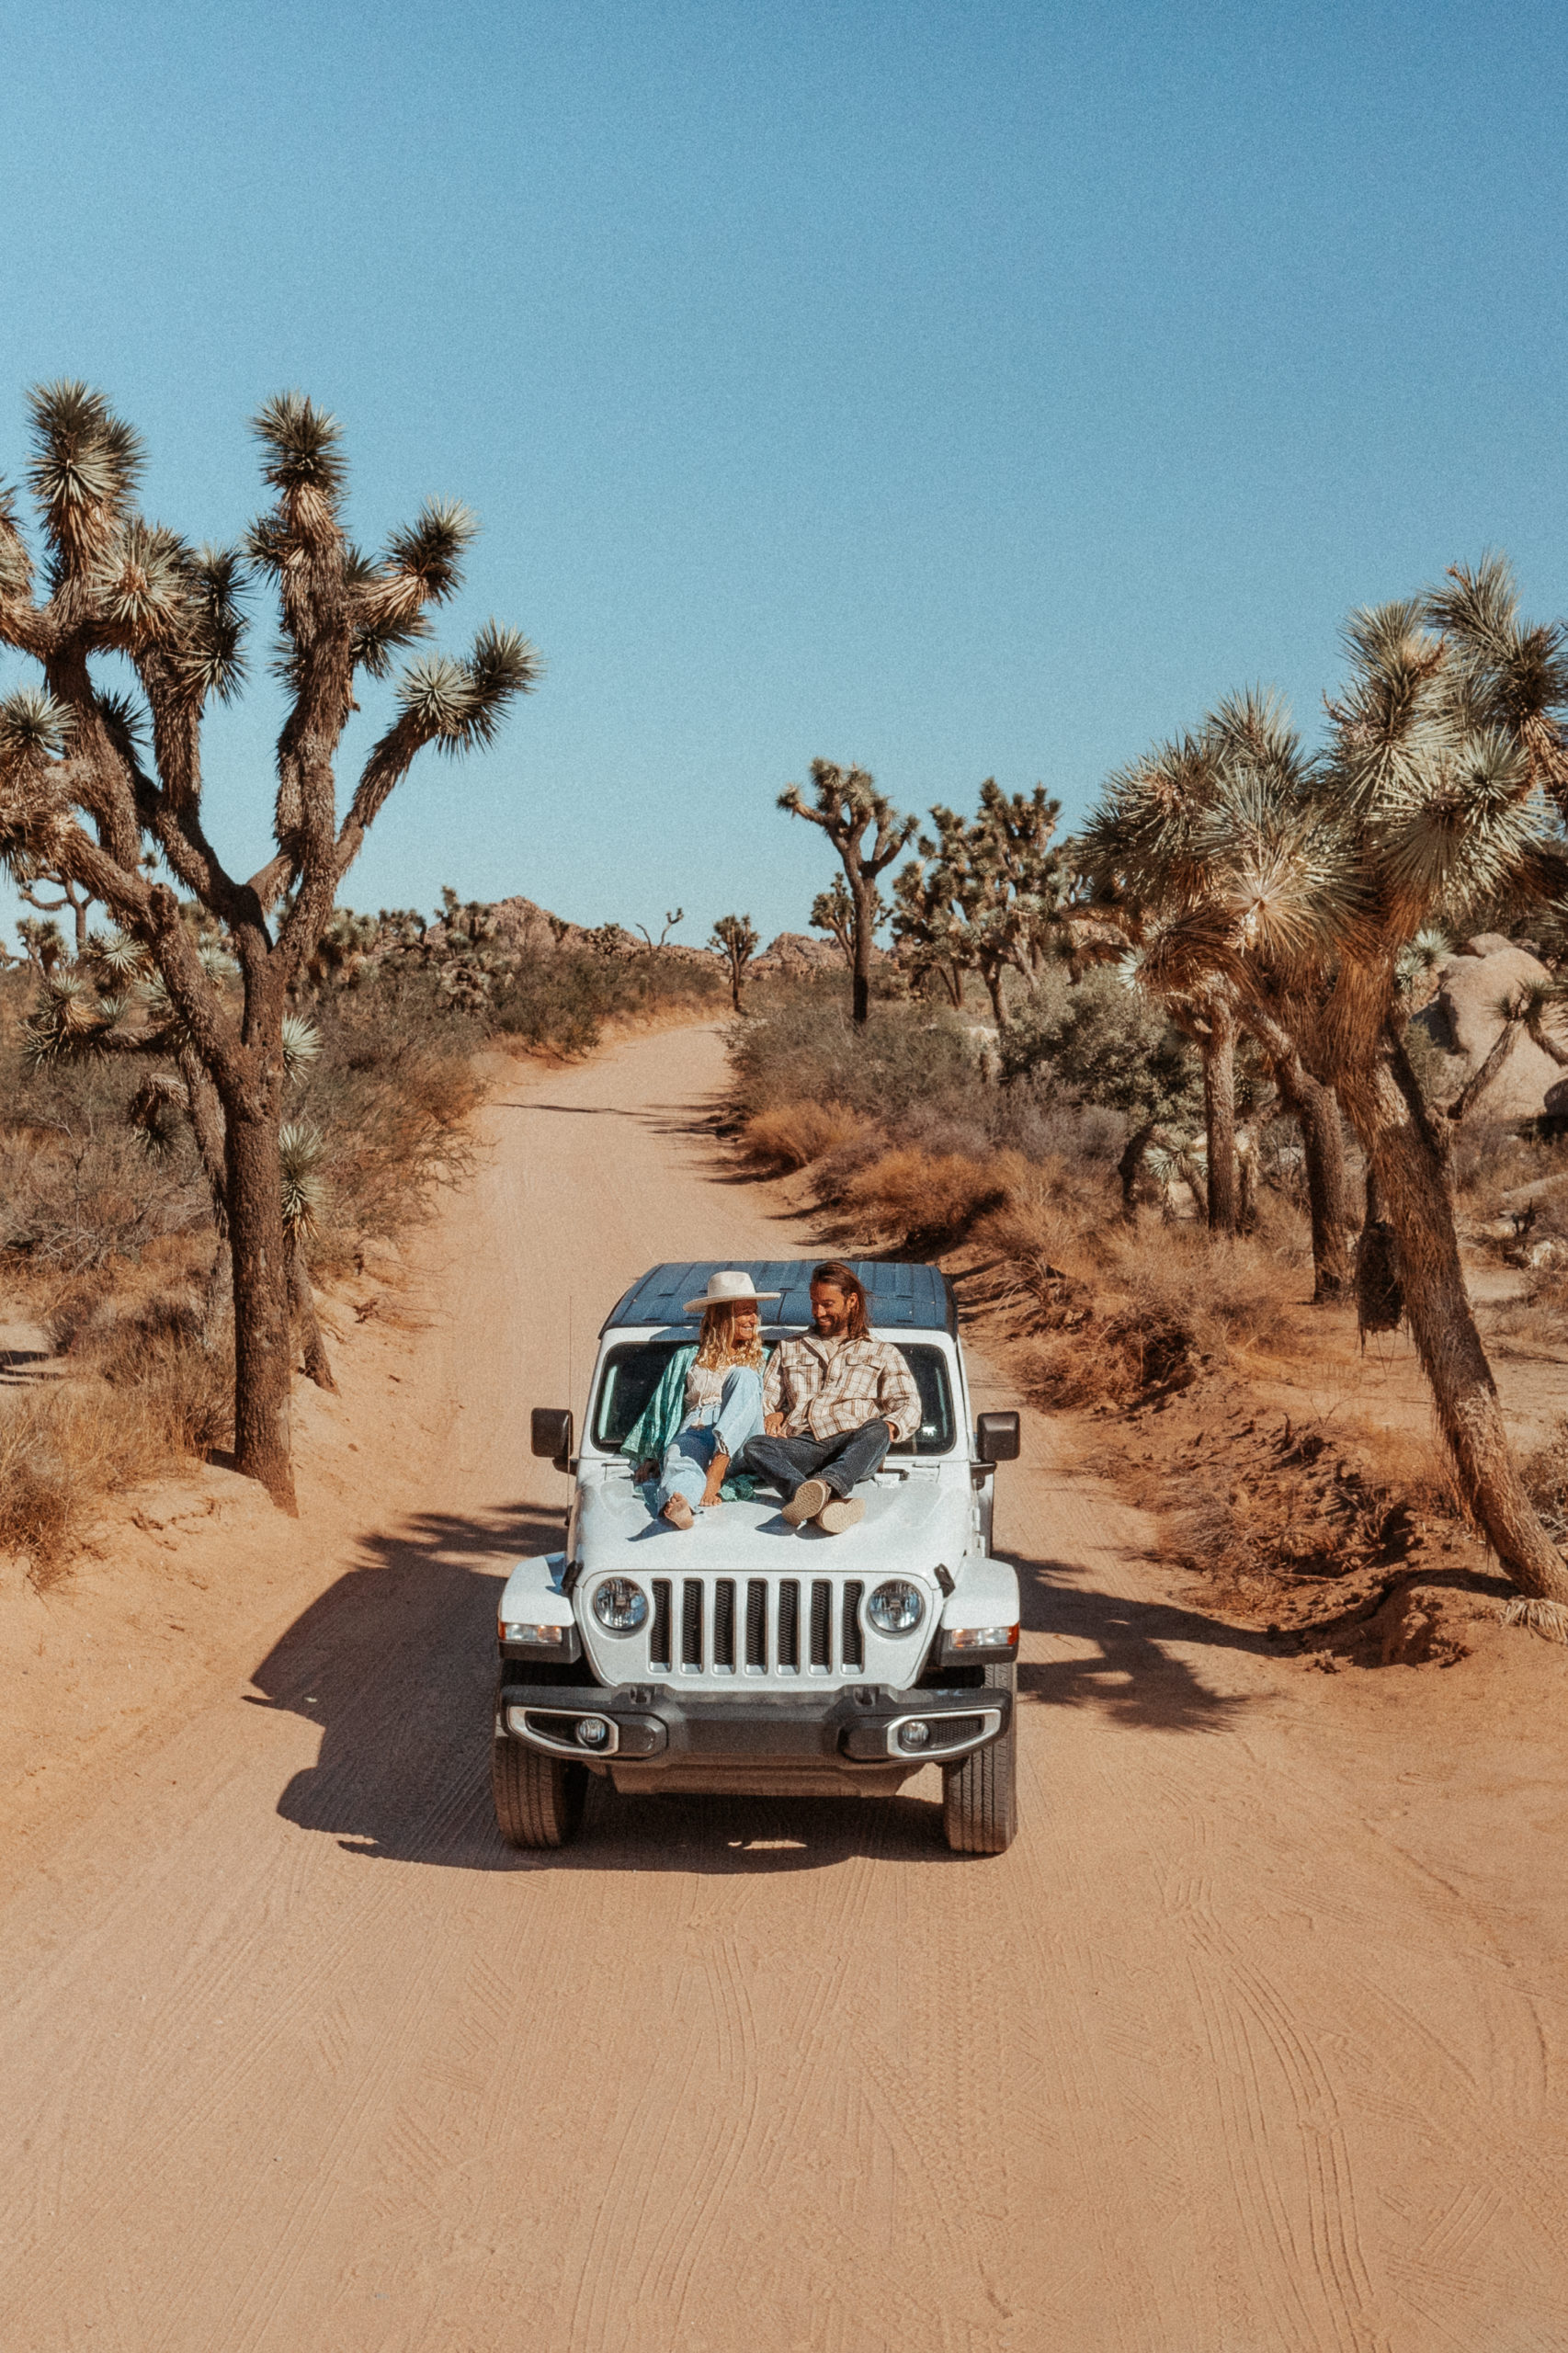 Sarah and Chesh sitting on the front of their Jeep in Joshua Tree National Park